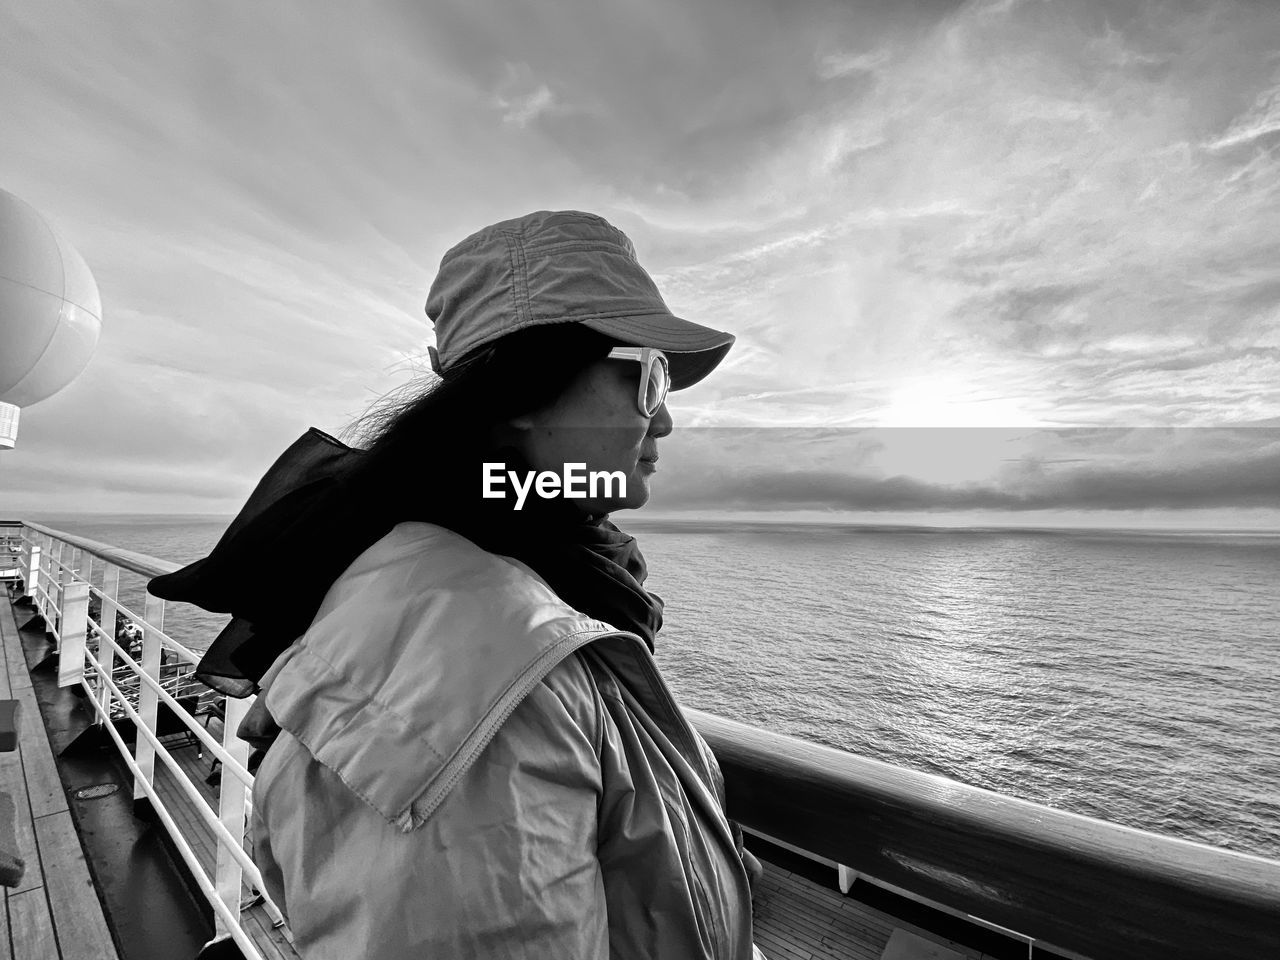 Woman wearing sunglasses while standing by railing of boat in sea against sky